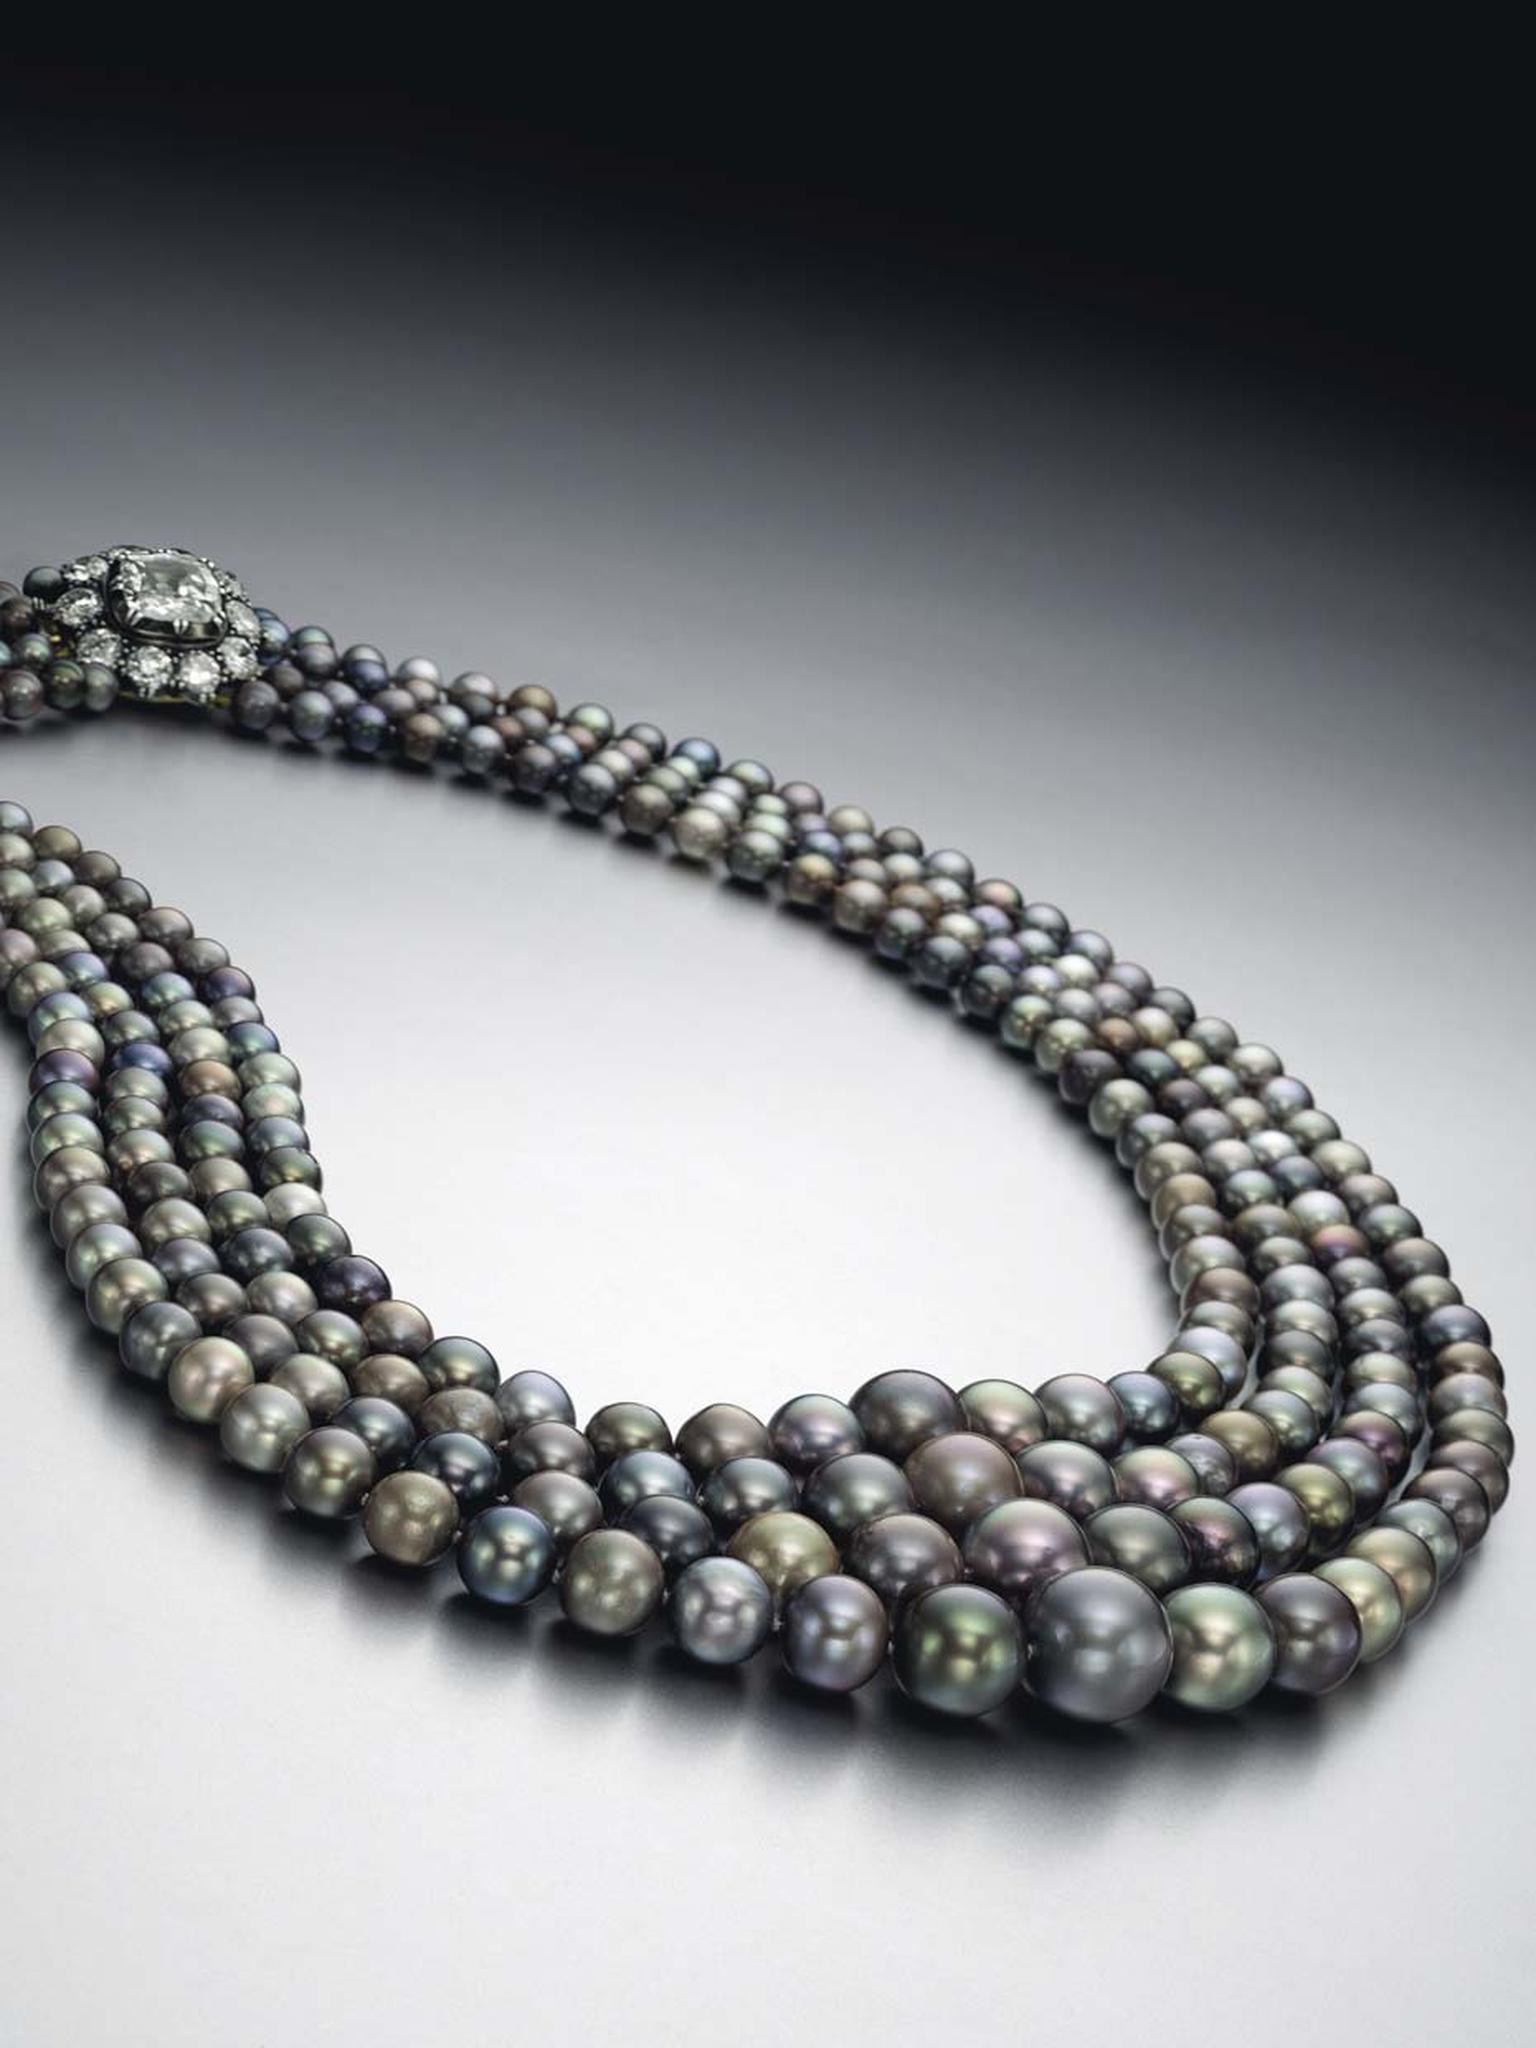 This four-strand natural pearl necklace, set with colored saltwater gems, set a new world record for a coloured pearl necklace , when it sold for just over $5 million at Christie's Magnificent Jewels sale in New York on April 14.